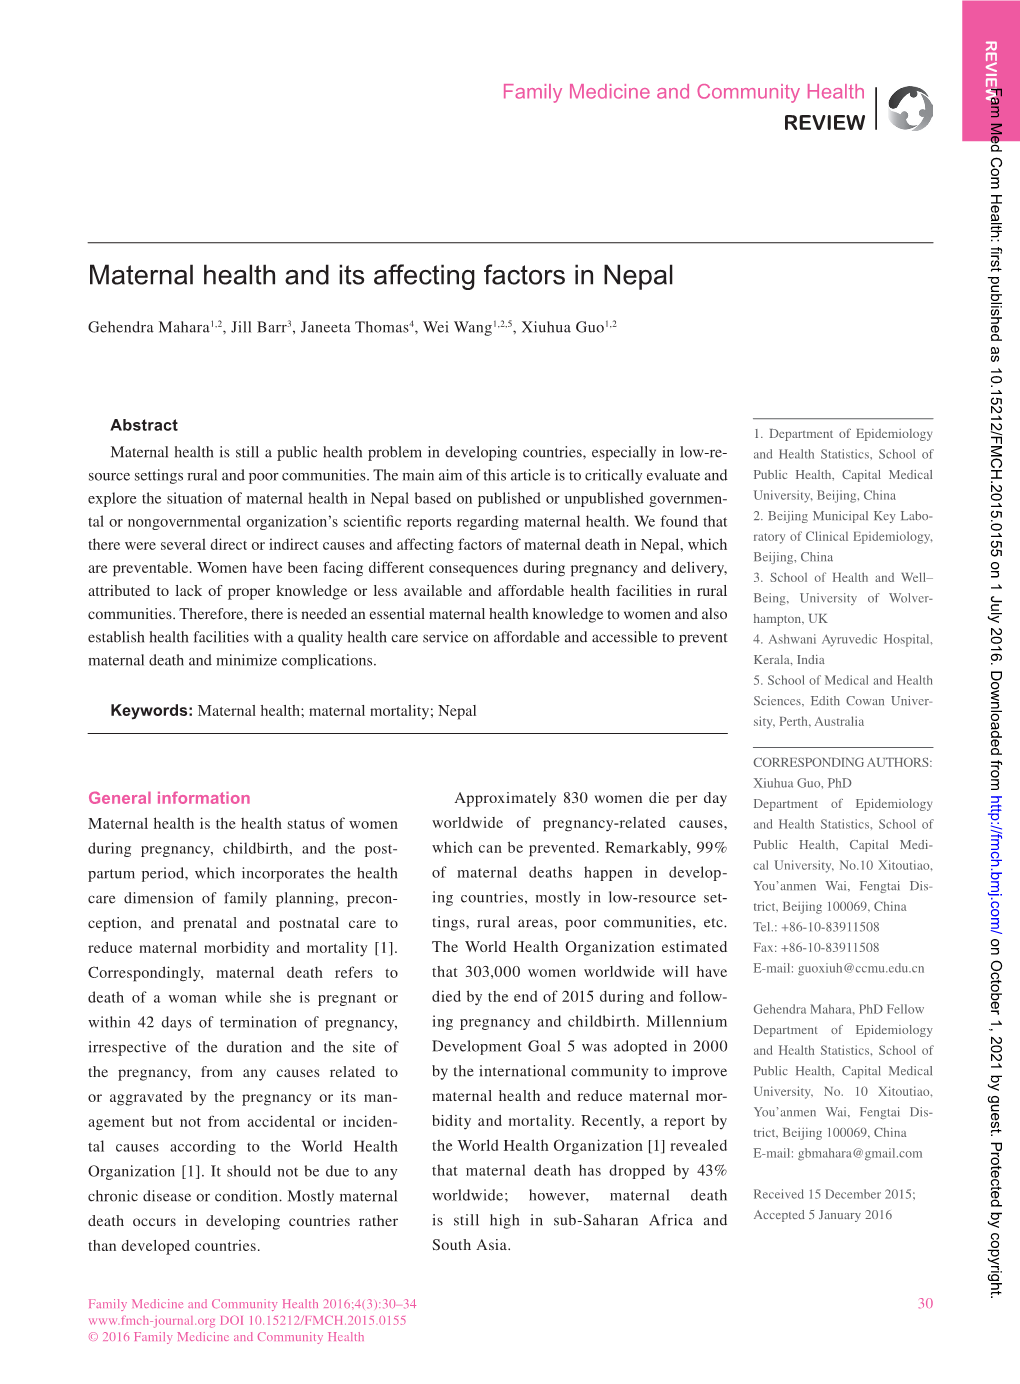 Maternal Health and Its Affecting Factors in Nepal